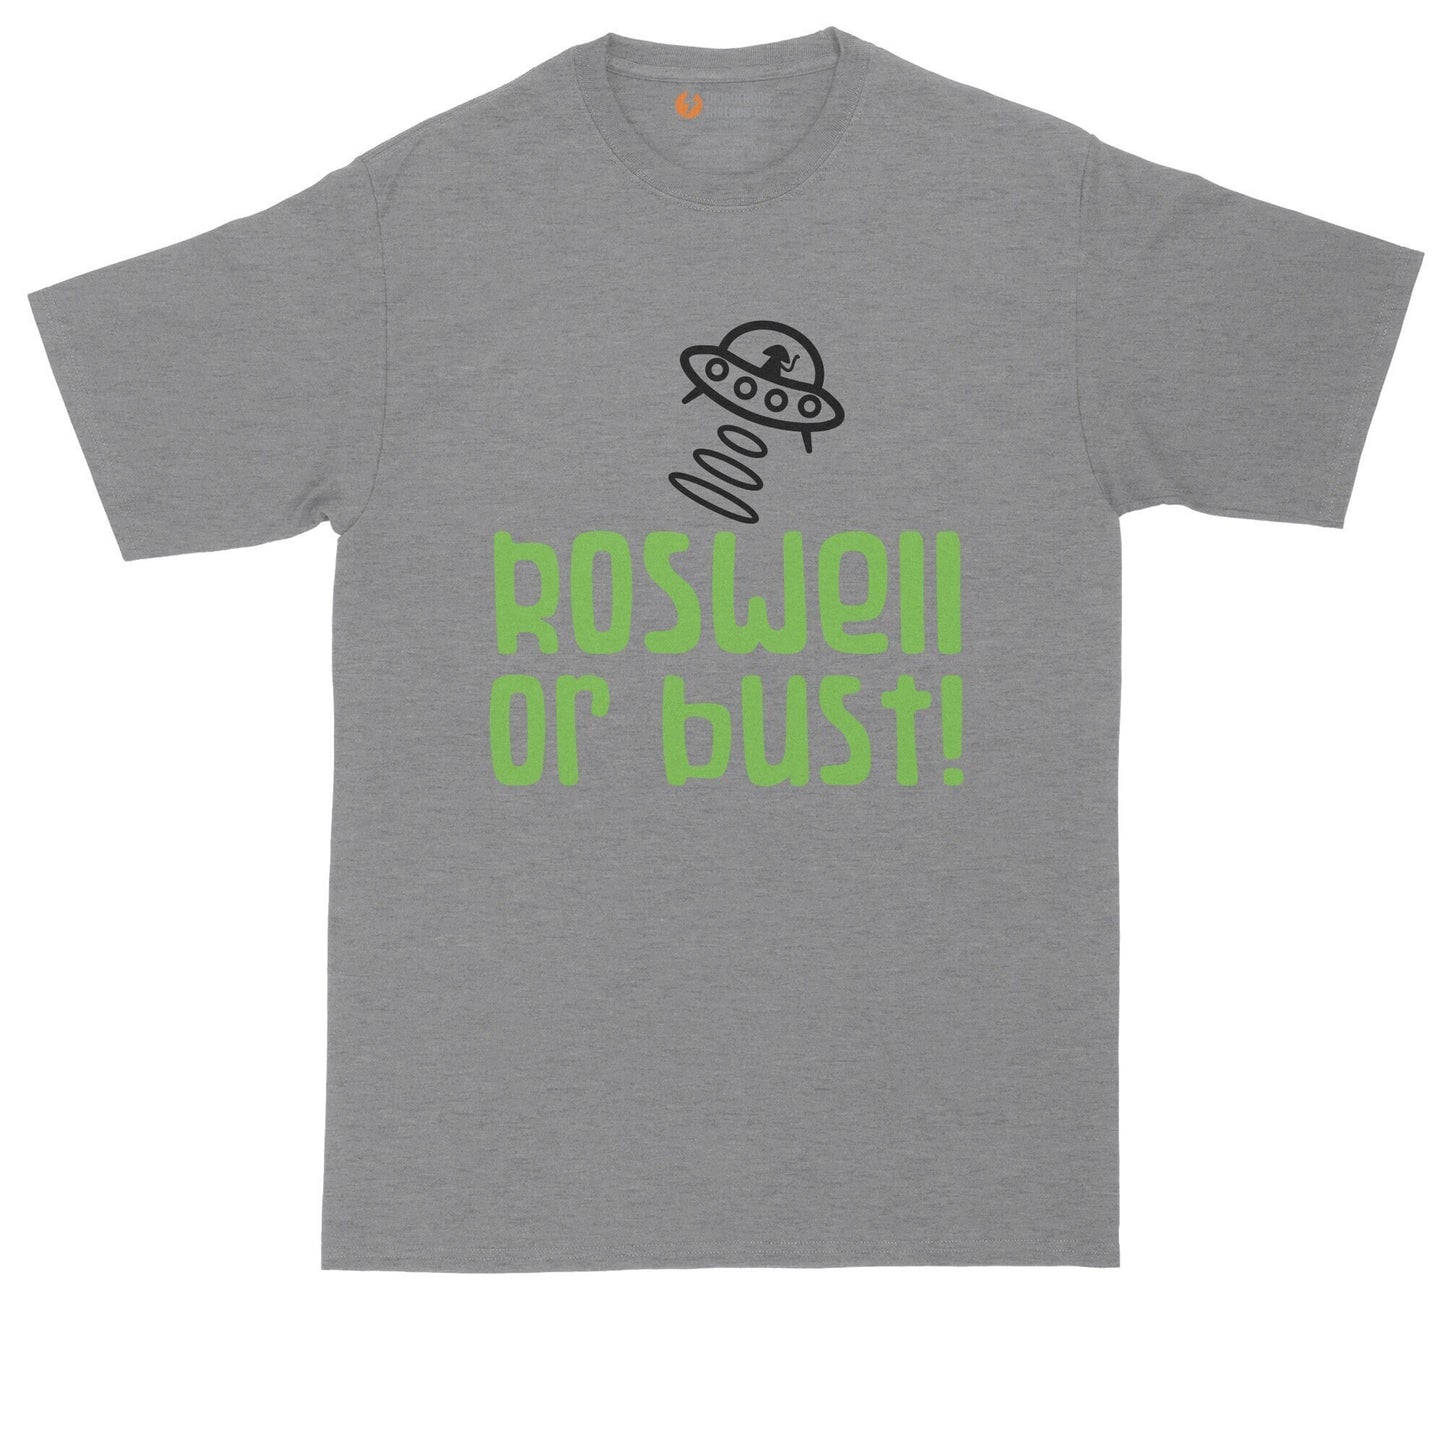 Roswell or Bust | Alien T-Shirt | Mens Big and Tall T-Shirt